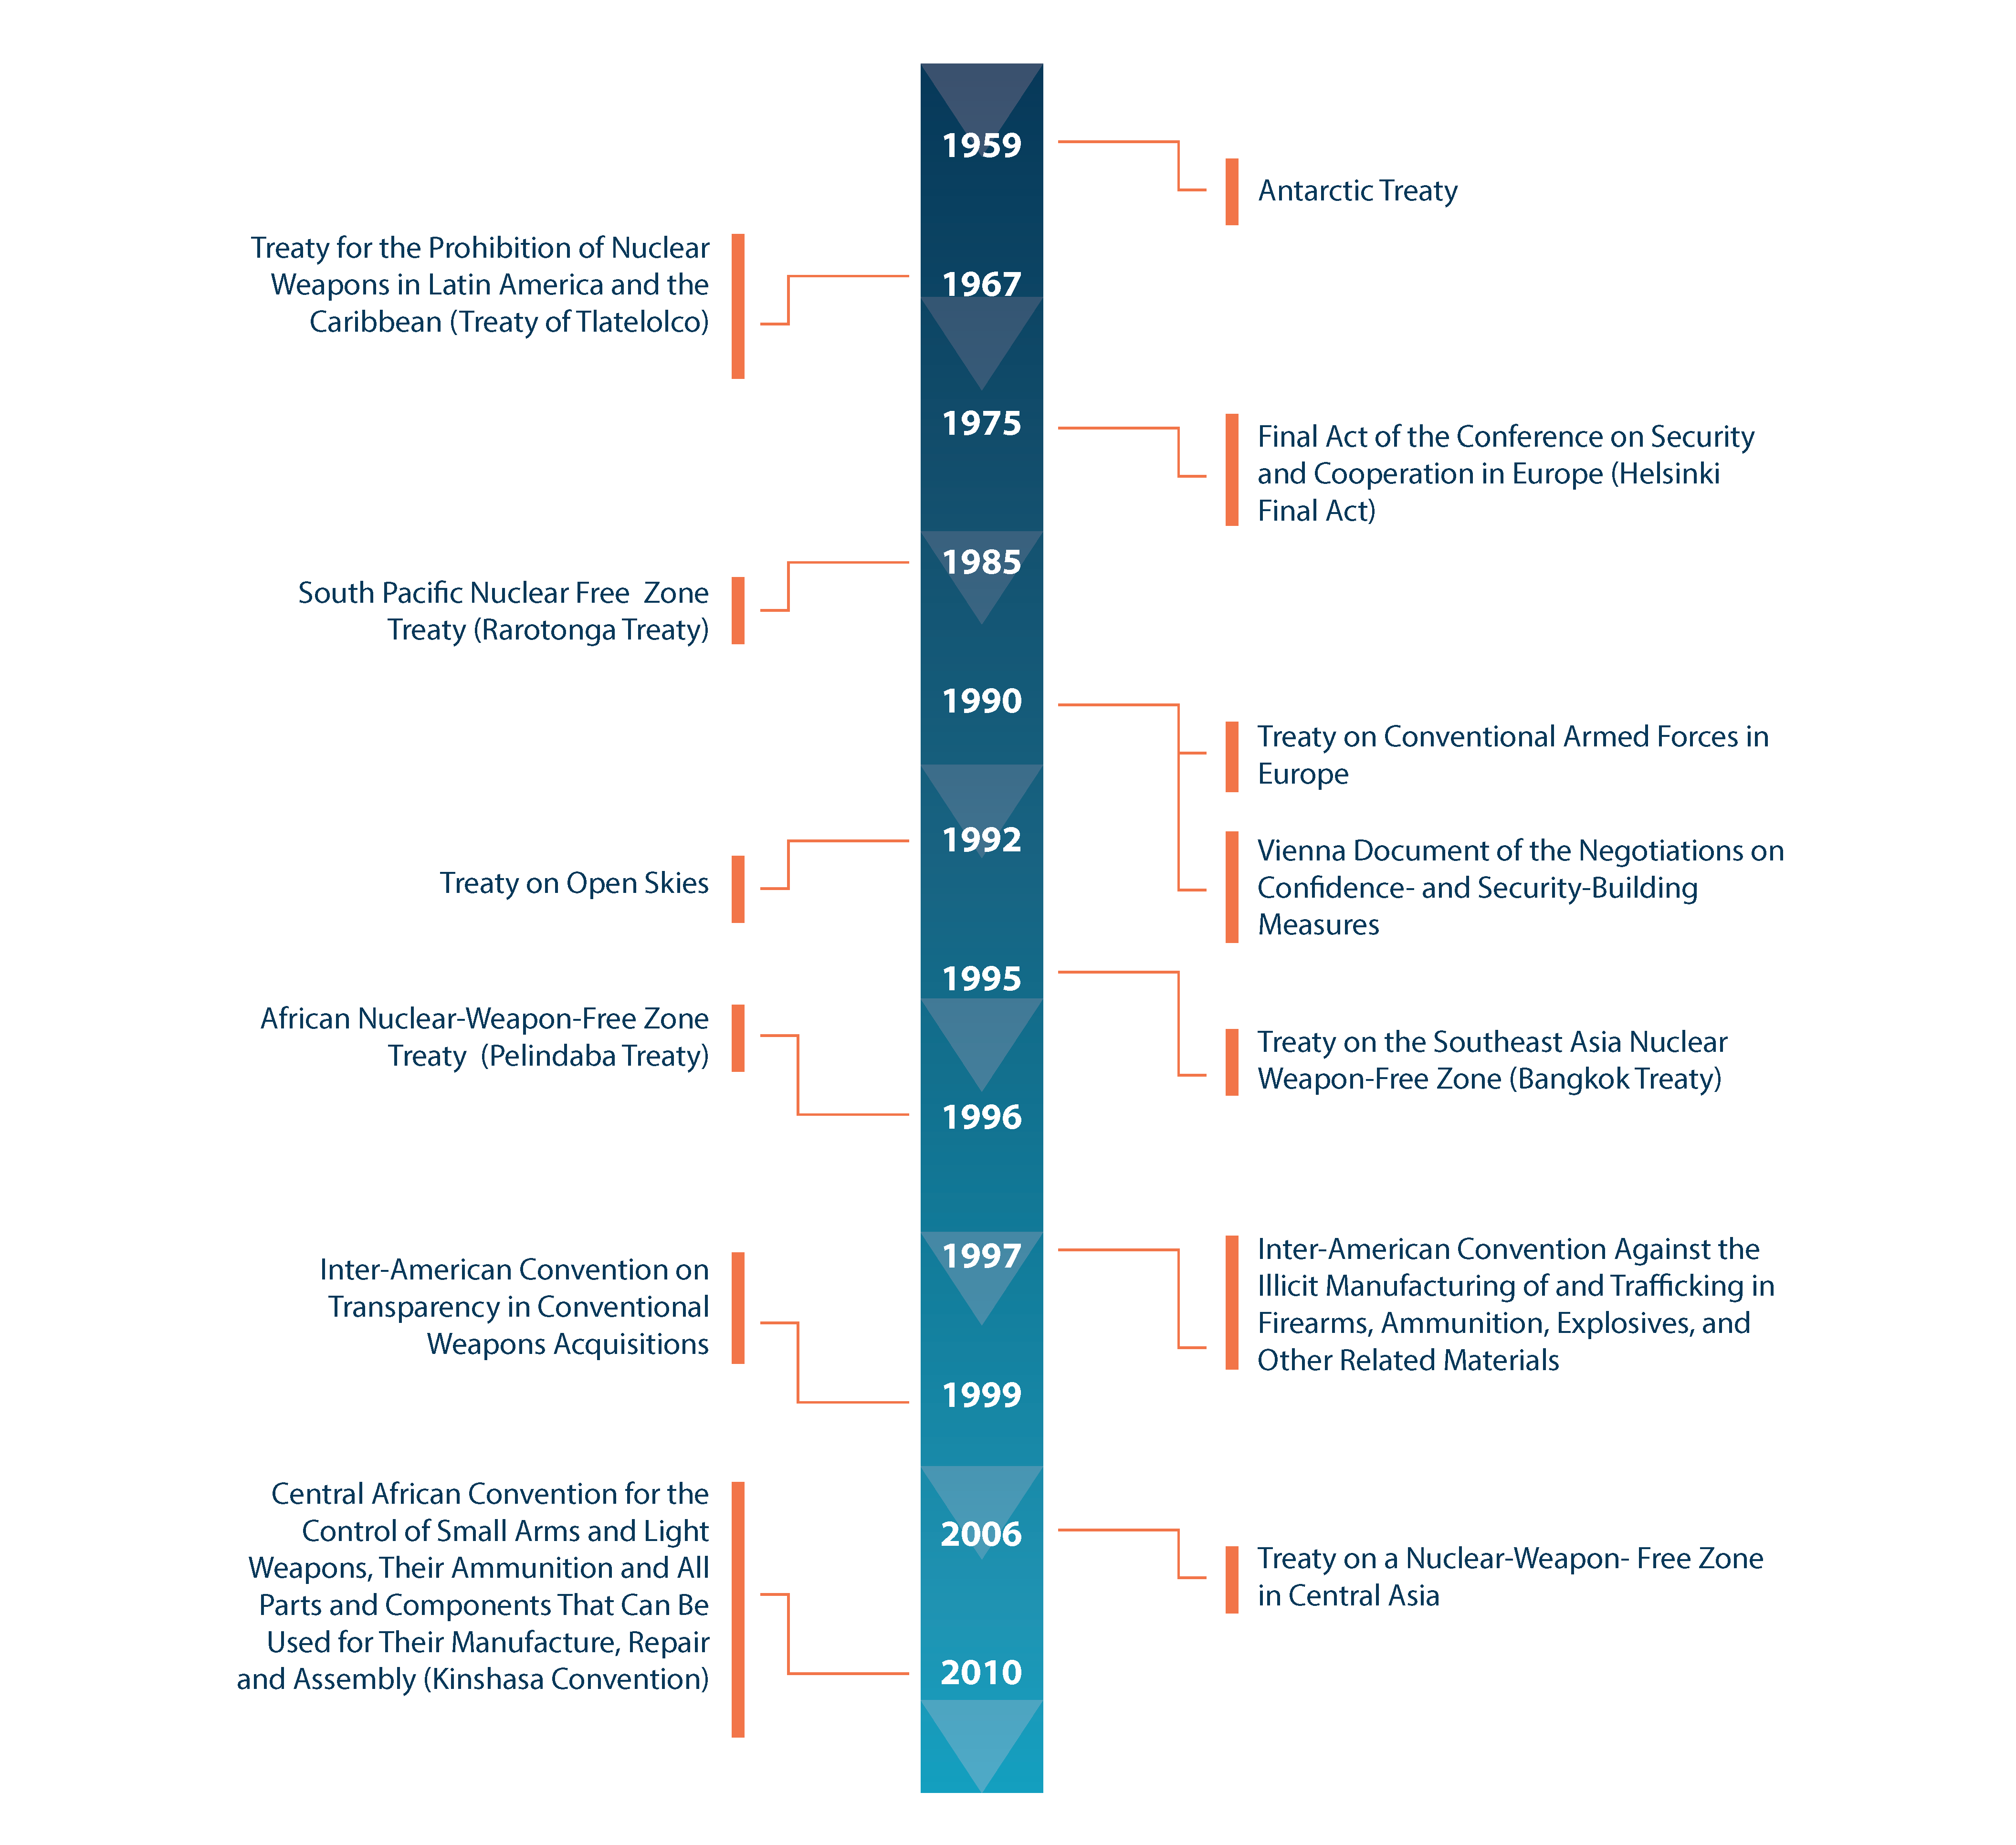 Timeline of highlights from 1959 to 2010